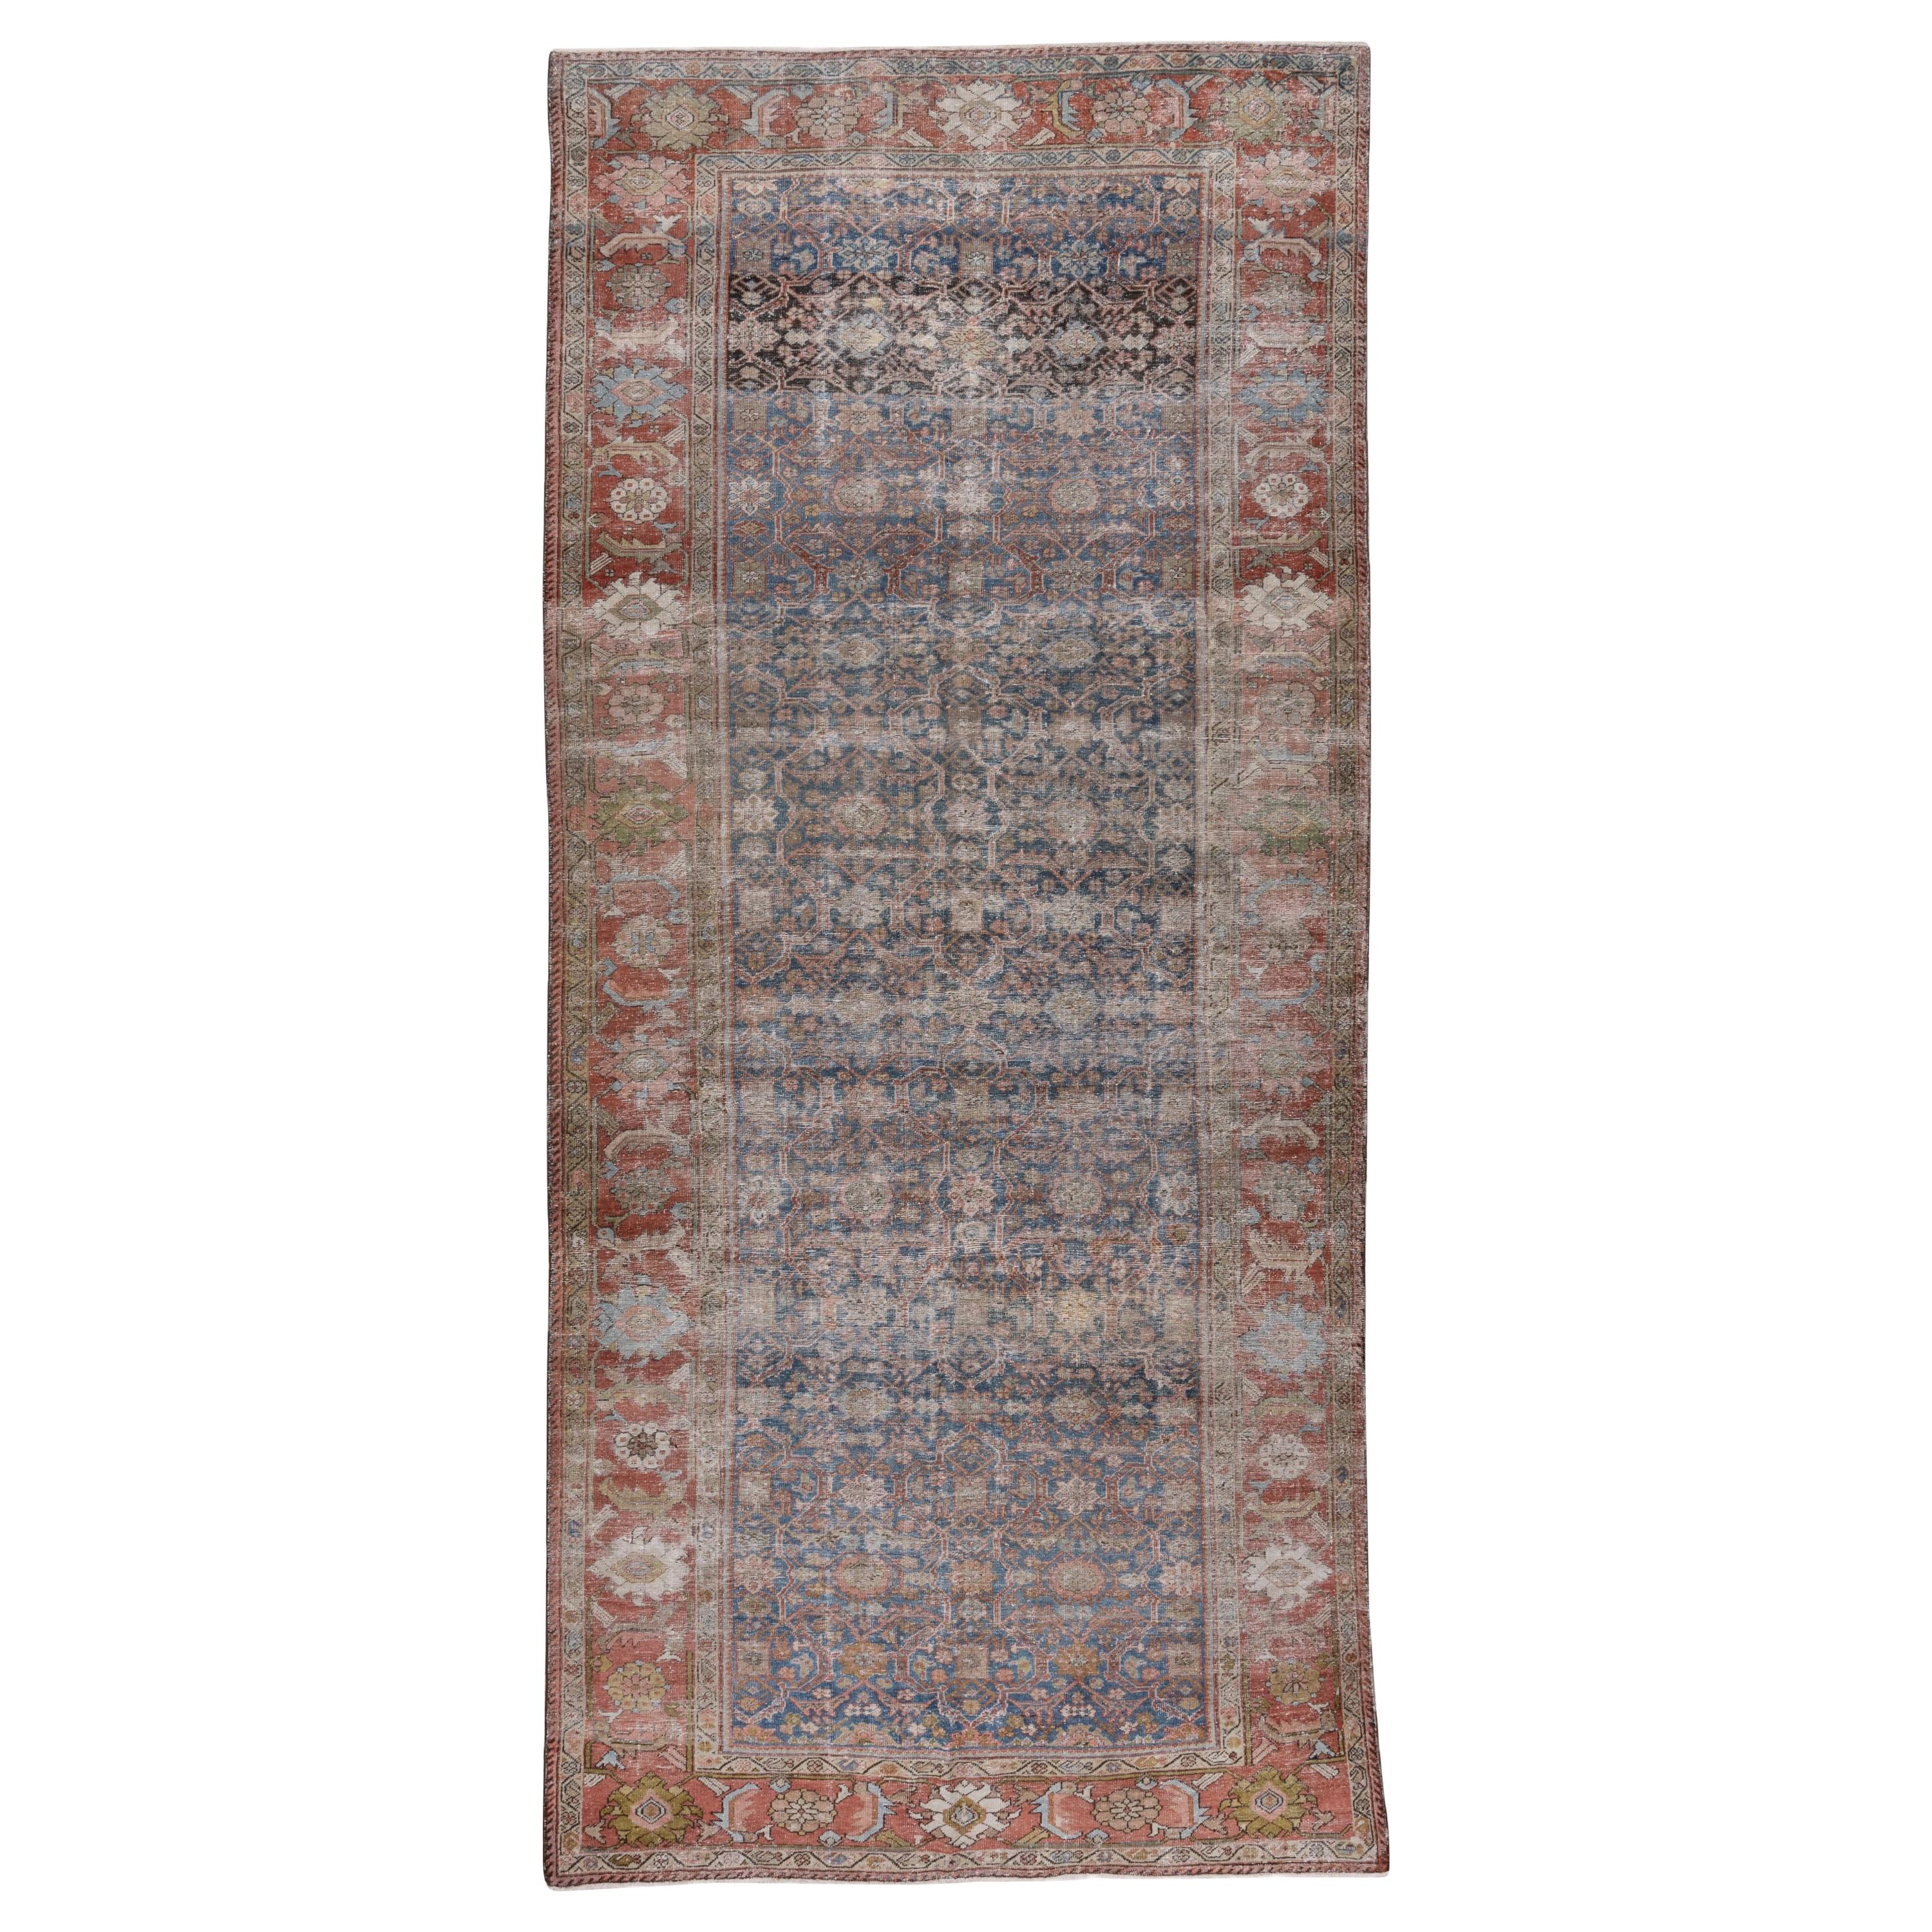 Antique Distressed Persian Mahal Carpet, Blue Field, Gallery Size